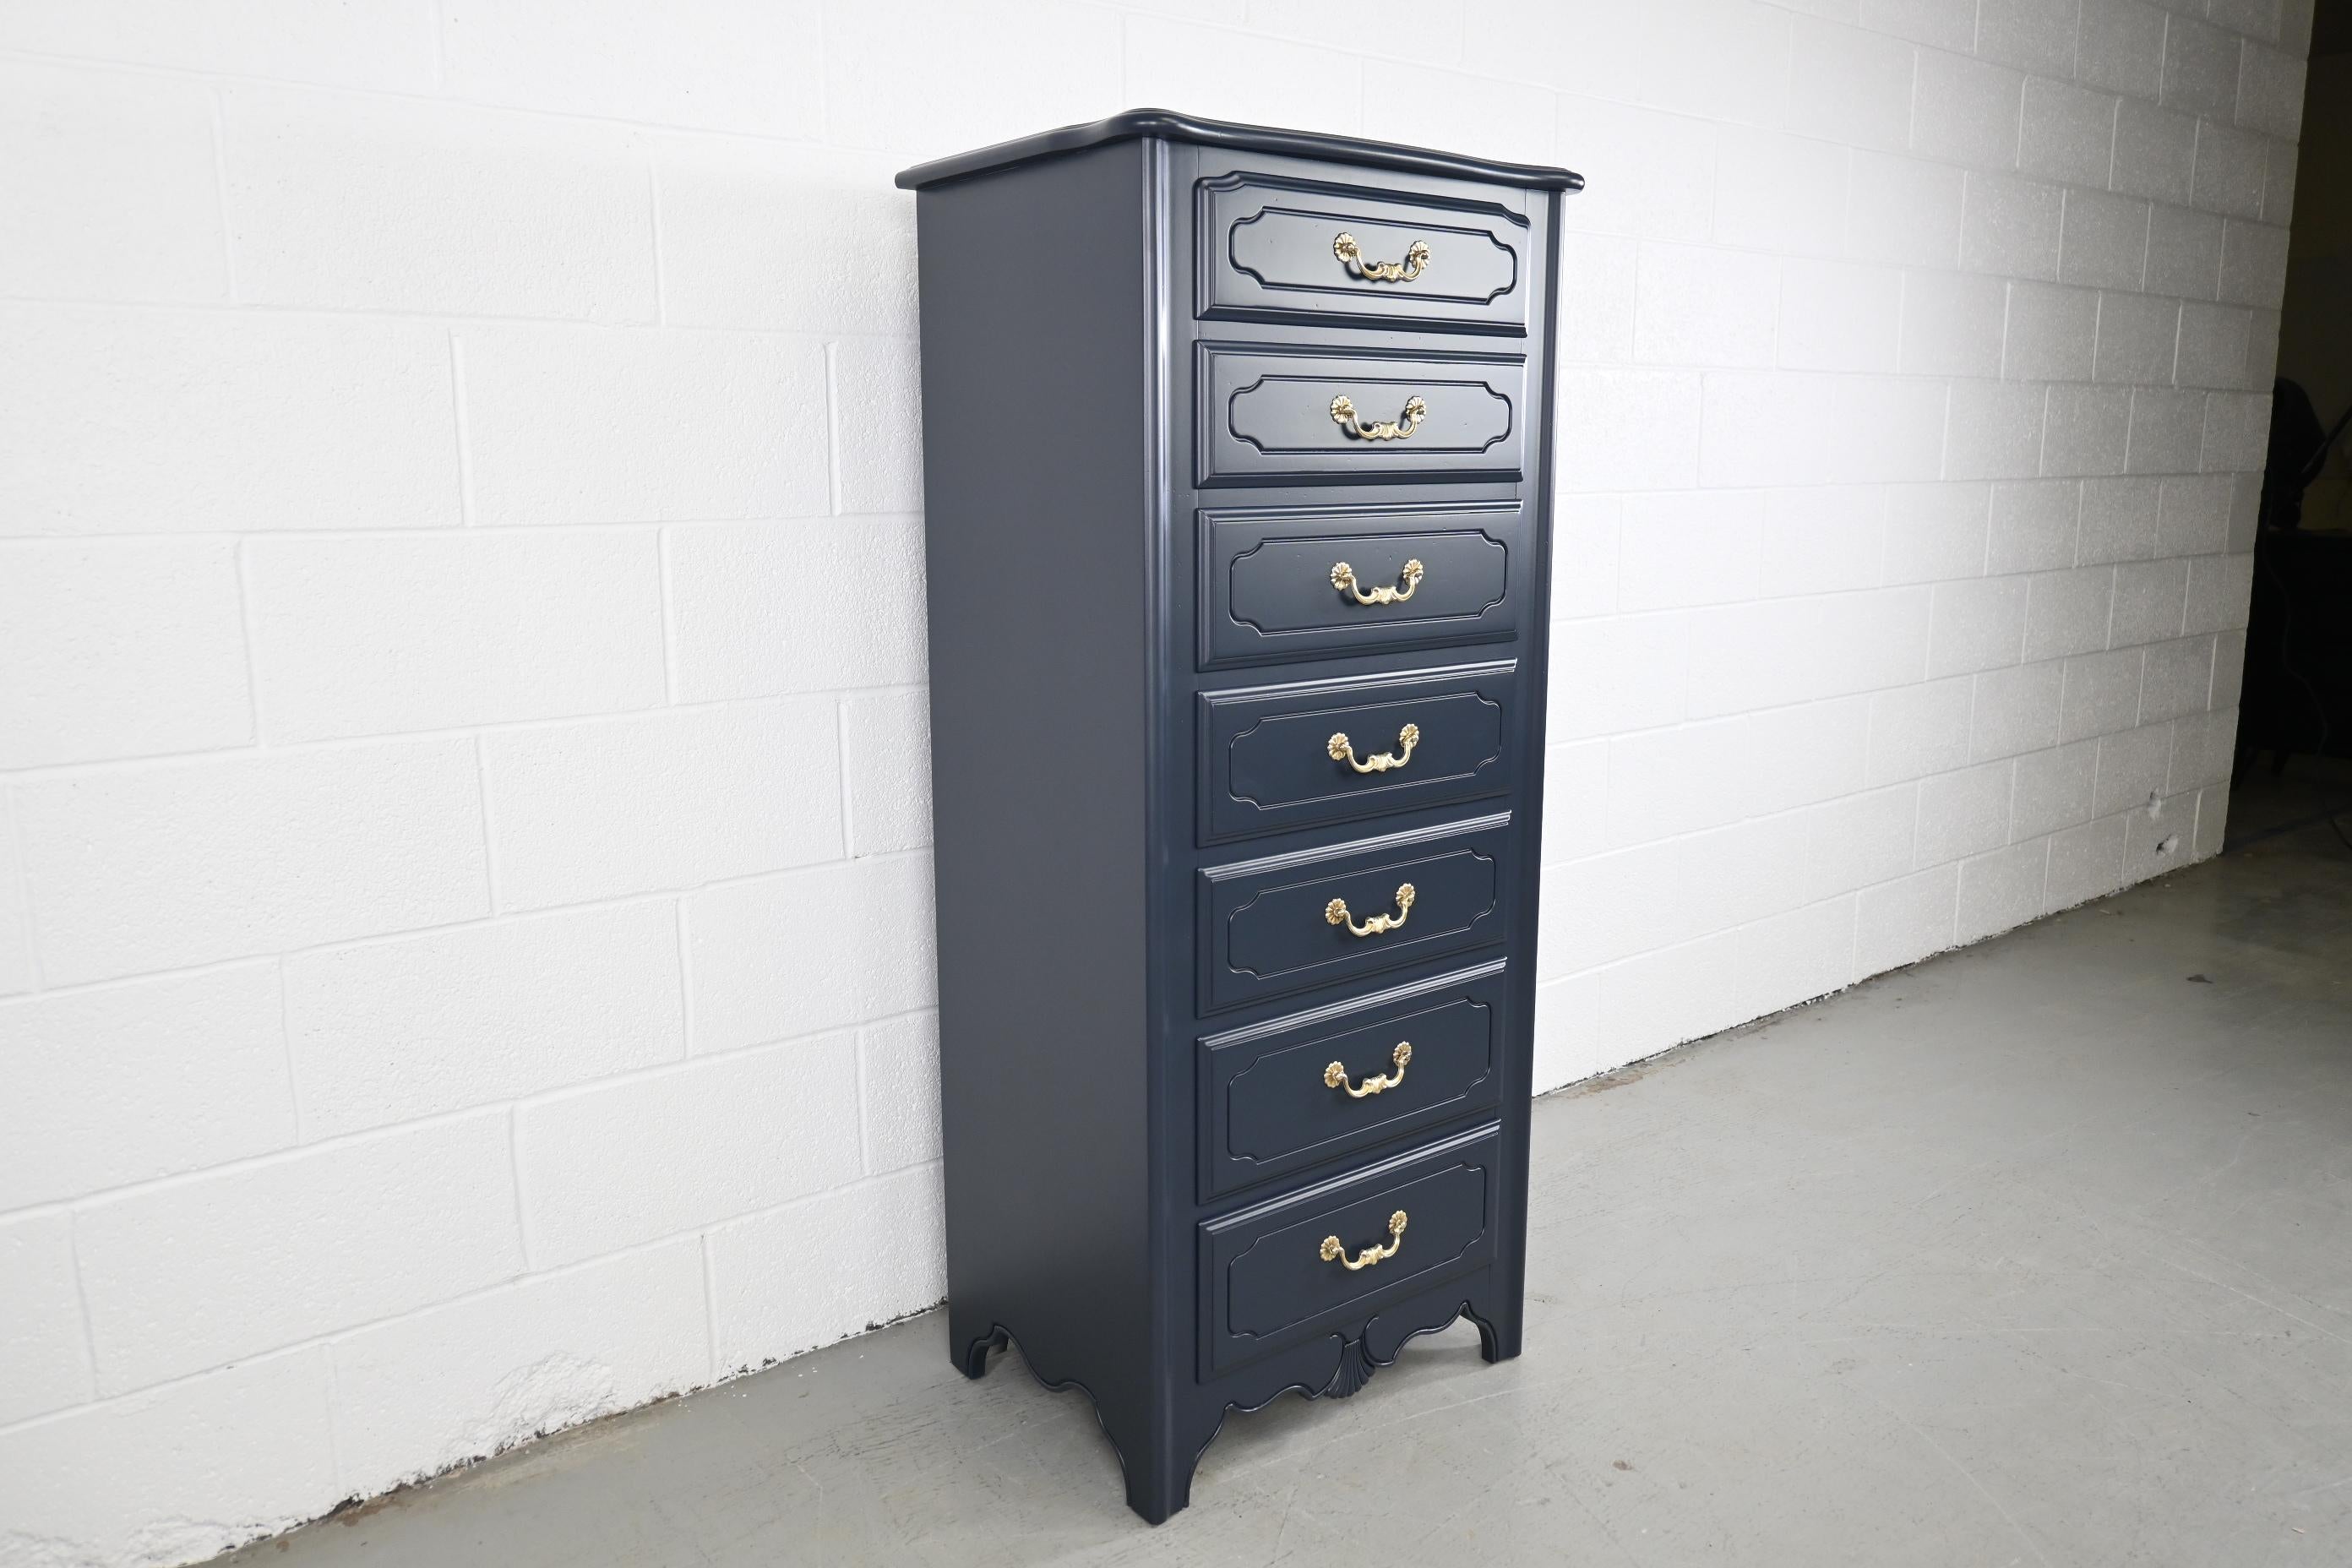 Ethan Allen French Country Navy Lacquered Seven Drawer Lingerie Chest of Drawers

Ethan Allen, USA, 1990s

Measures: 24 Wide x 17 Deep x 54.5 High

French Country style seven drawer chest of drawer refinished in a dark navy blue lacquer with